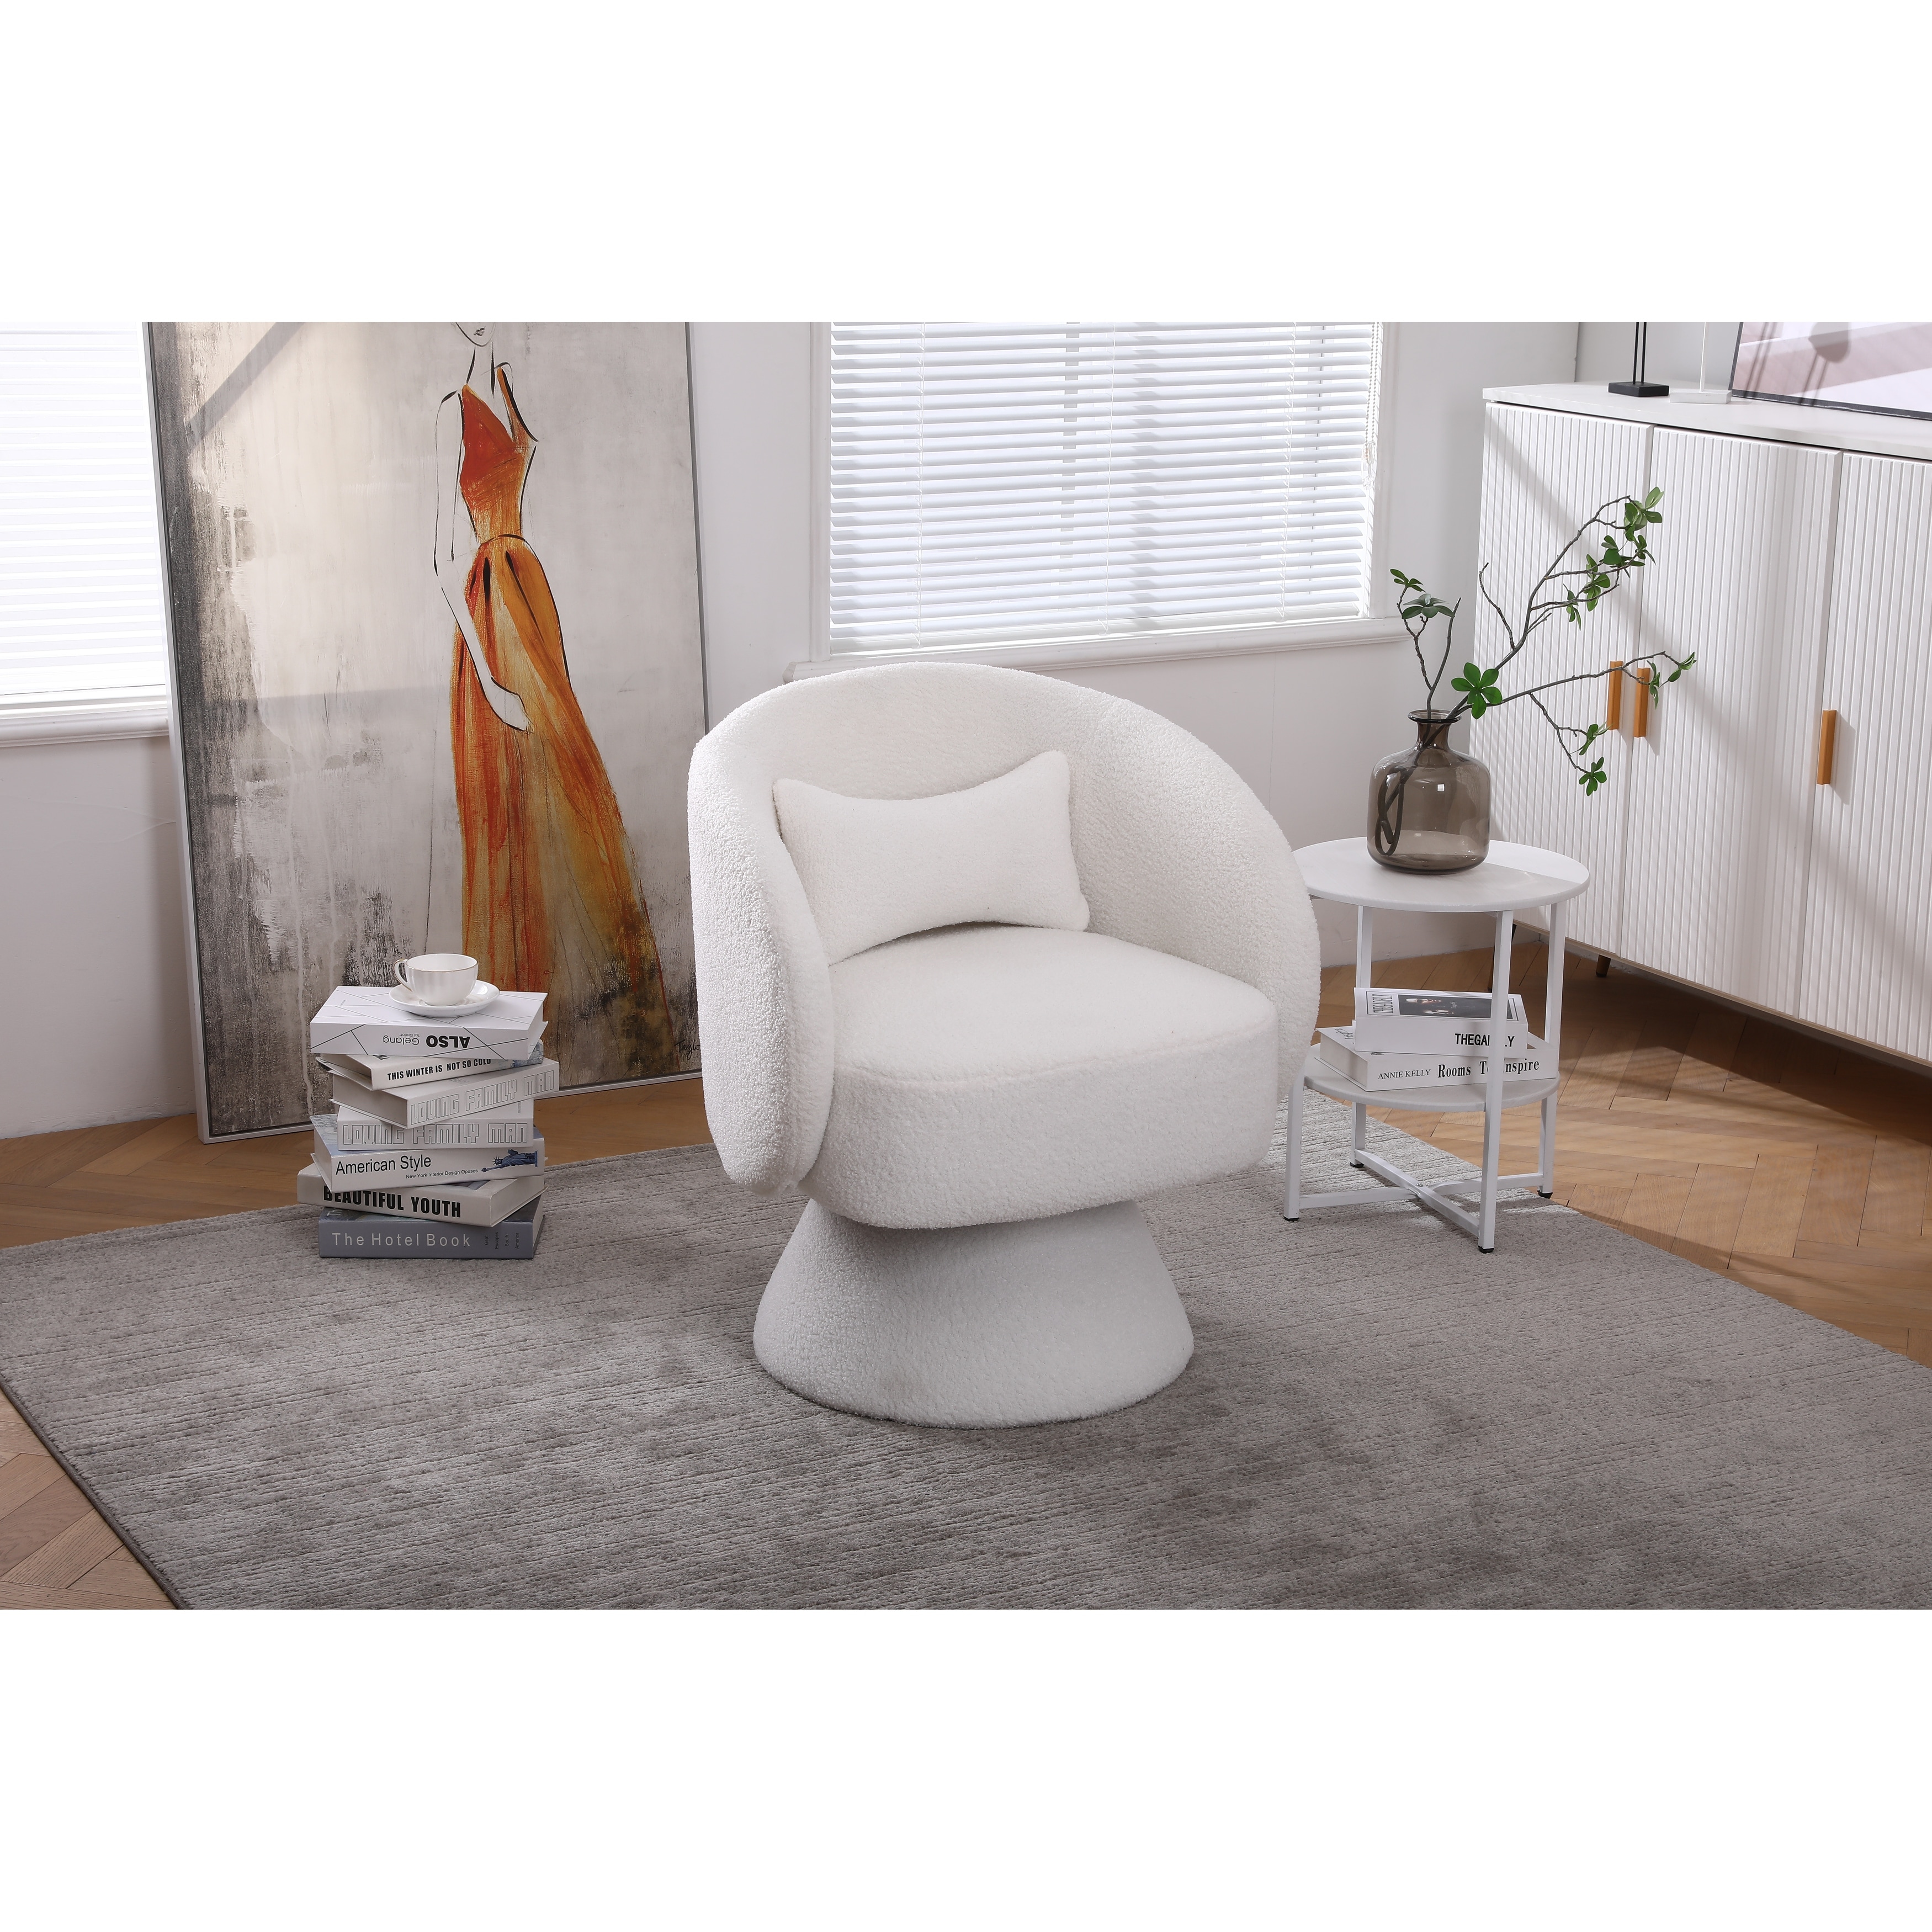 https://ak1.ostkcdn.com/images/products/is/images/direct/9dbf172d820314b47182d3d1a3ee8a4de560cdd8/Modern-Accent-Chair-Swivel-Armchair%2C-Round-Fabric-Barrel-Chairs-Single-Sofa-Lounge-Chair-with-Small-Pillow-for-Living-Room.jpg